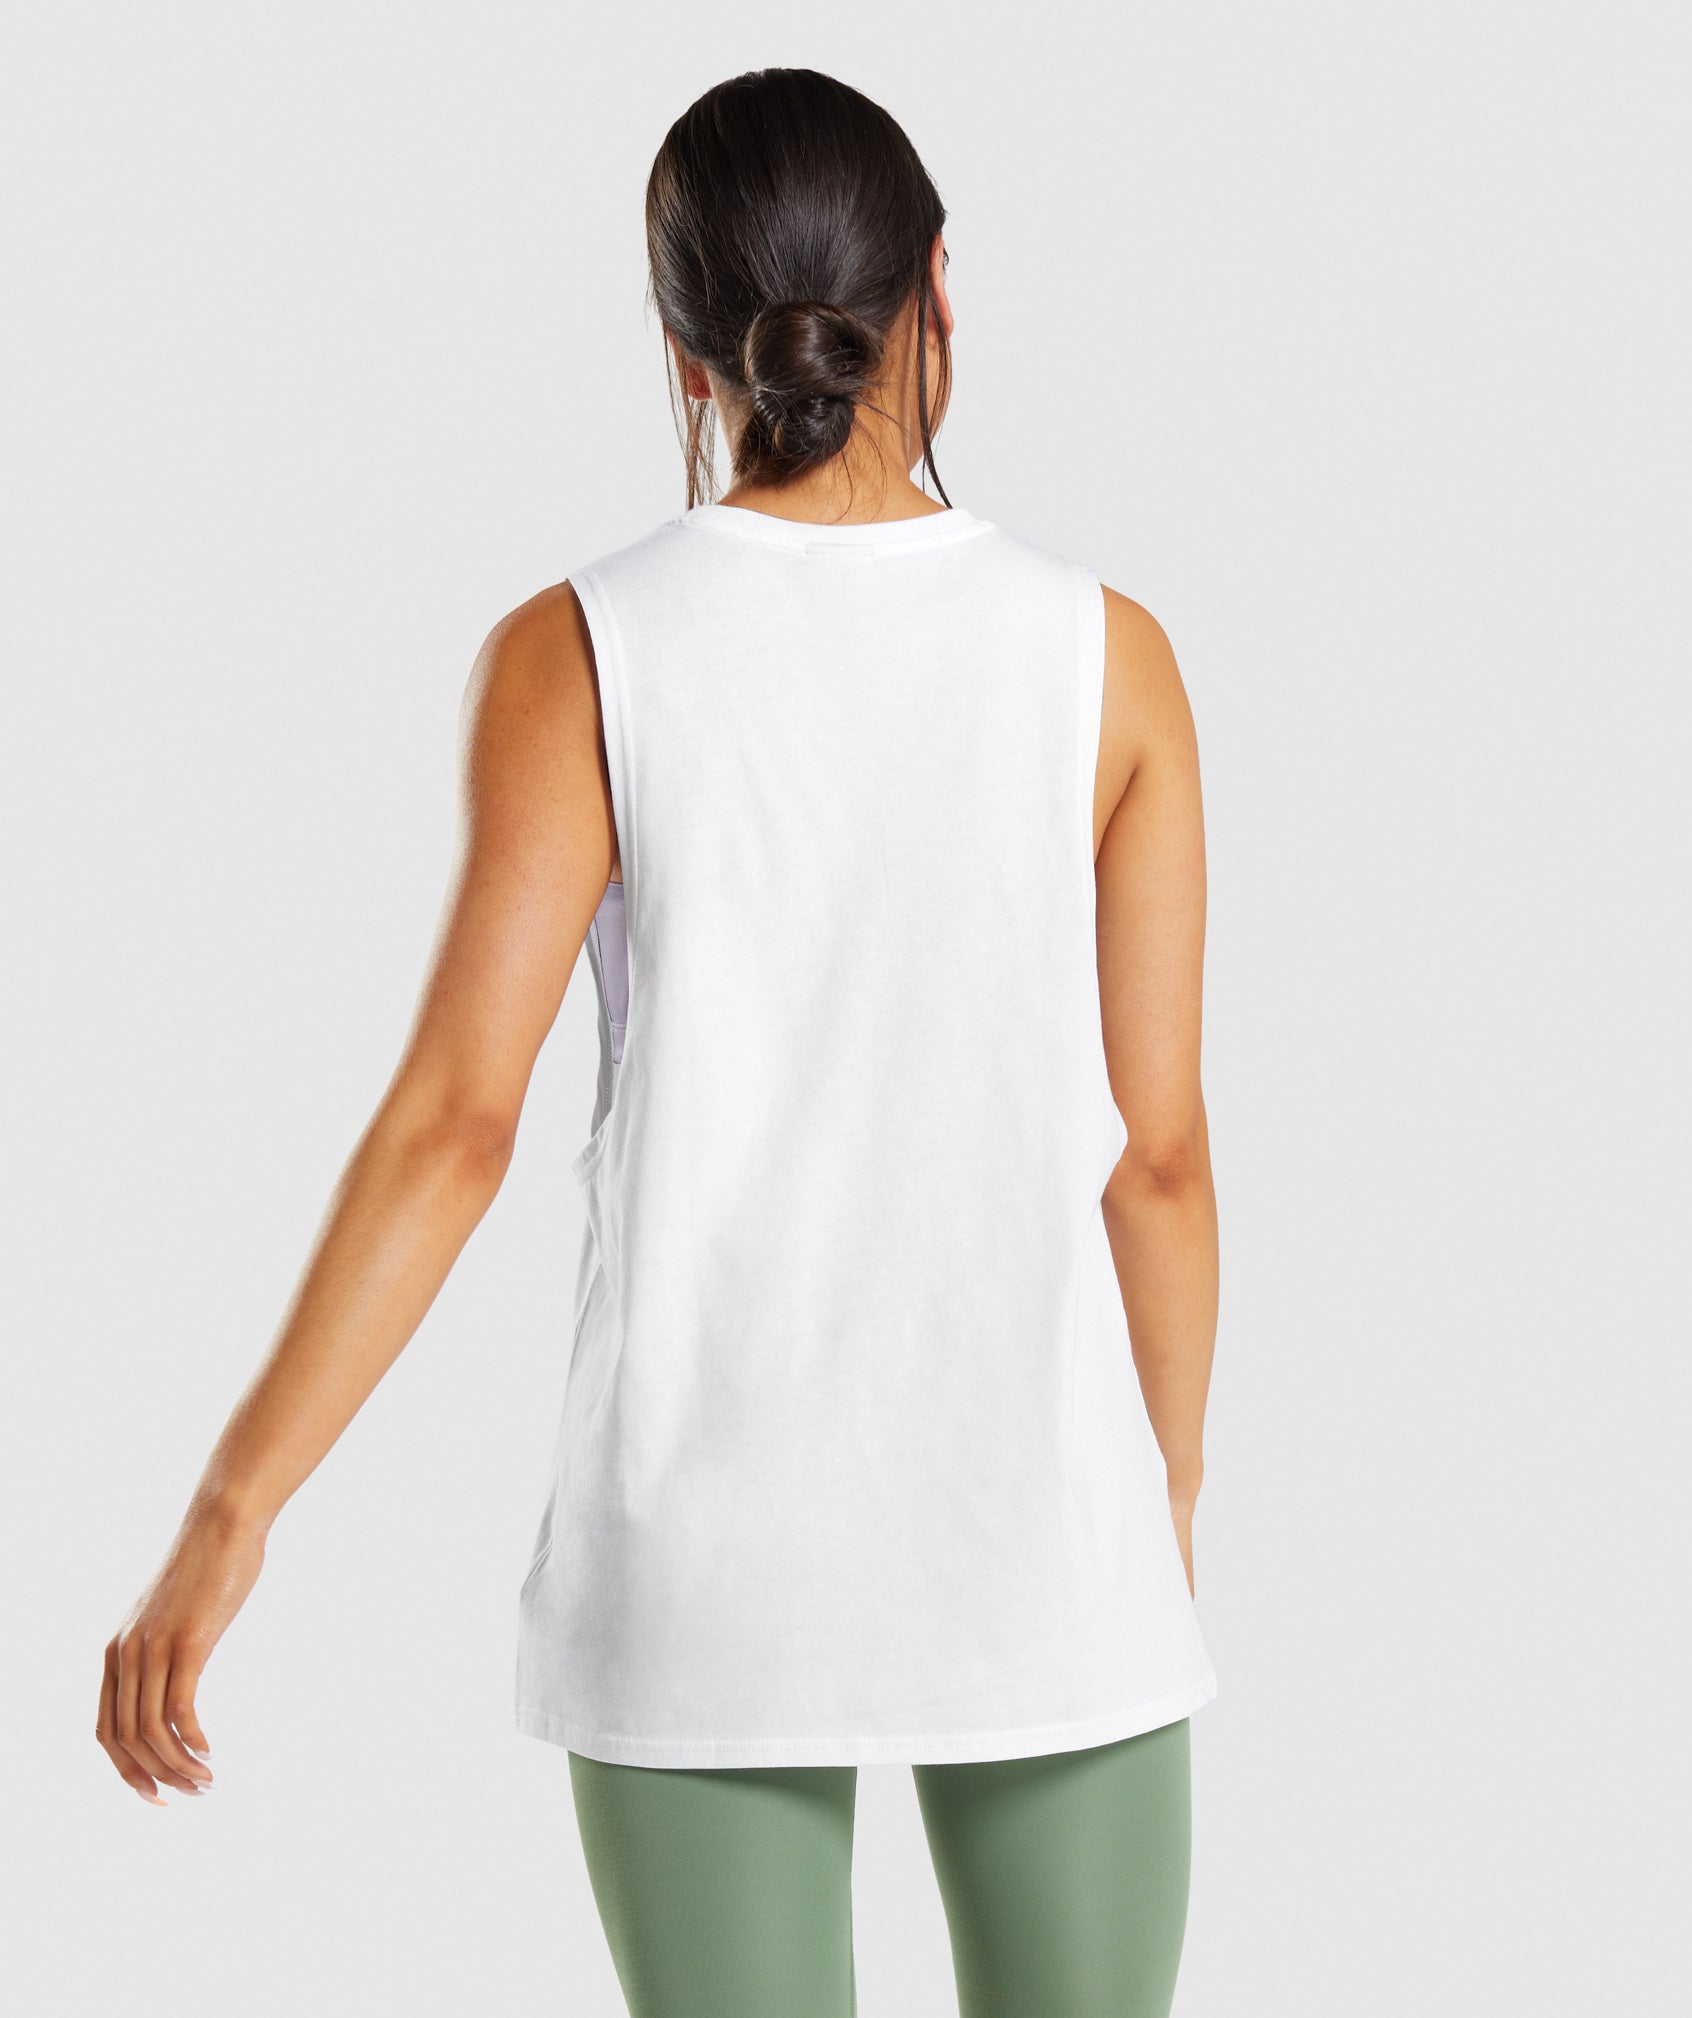 Training Drop Arm Tank in White - view 2